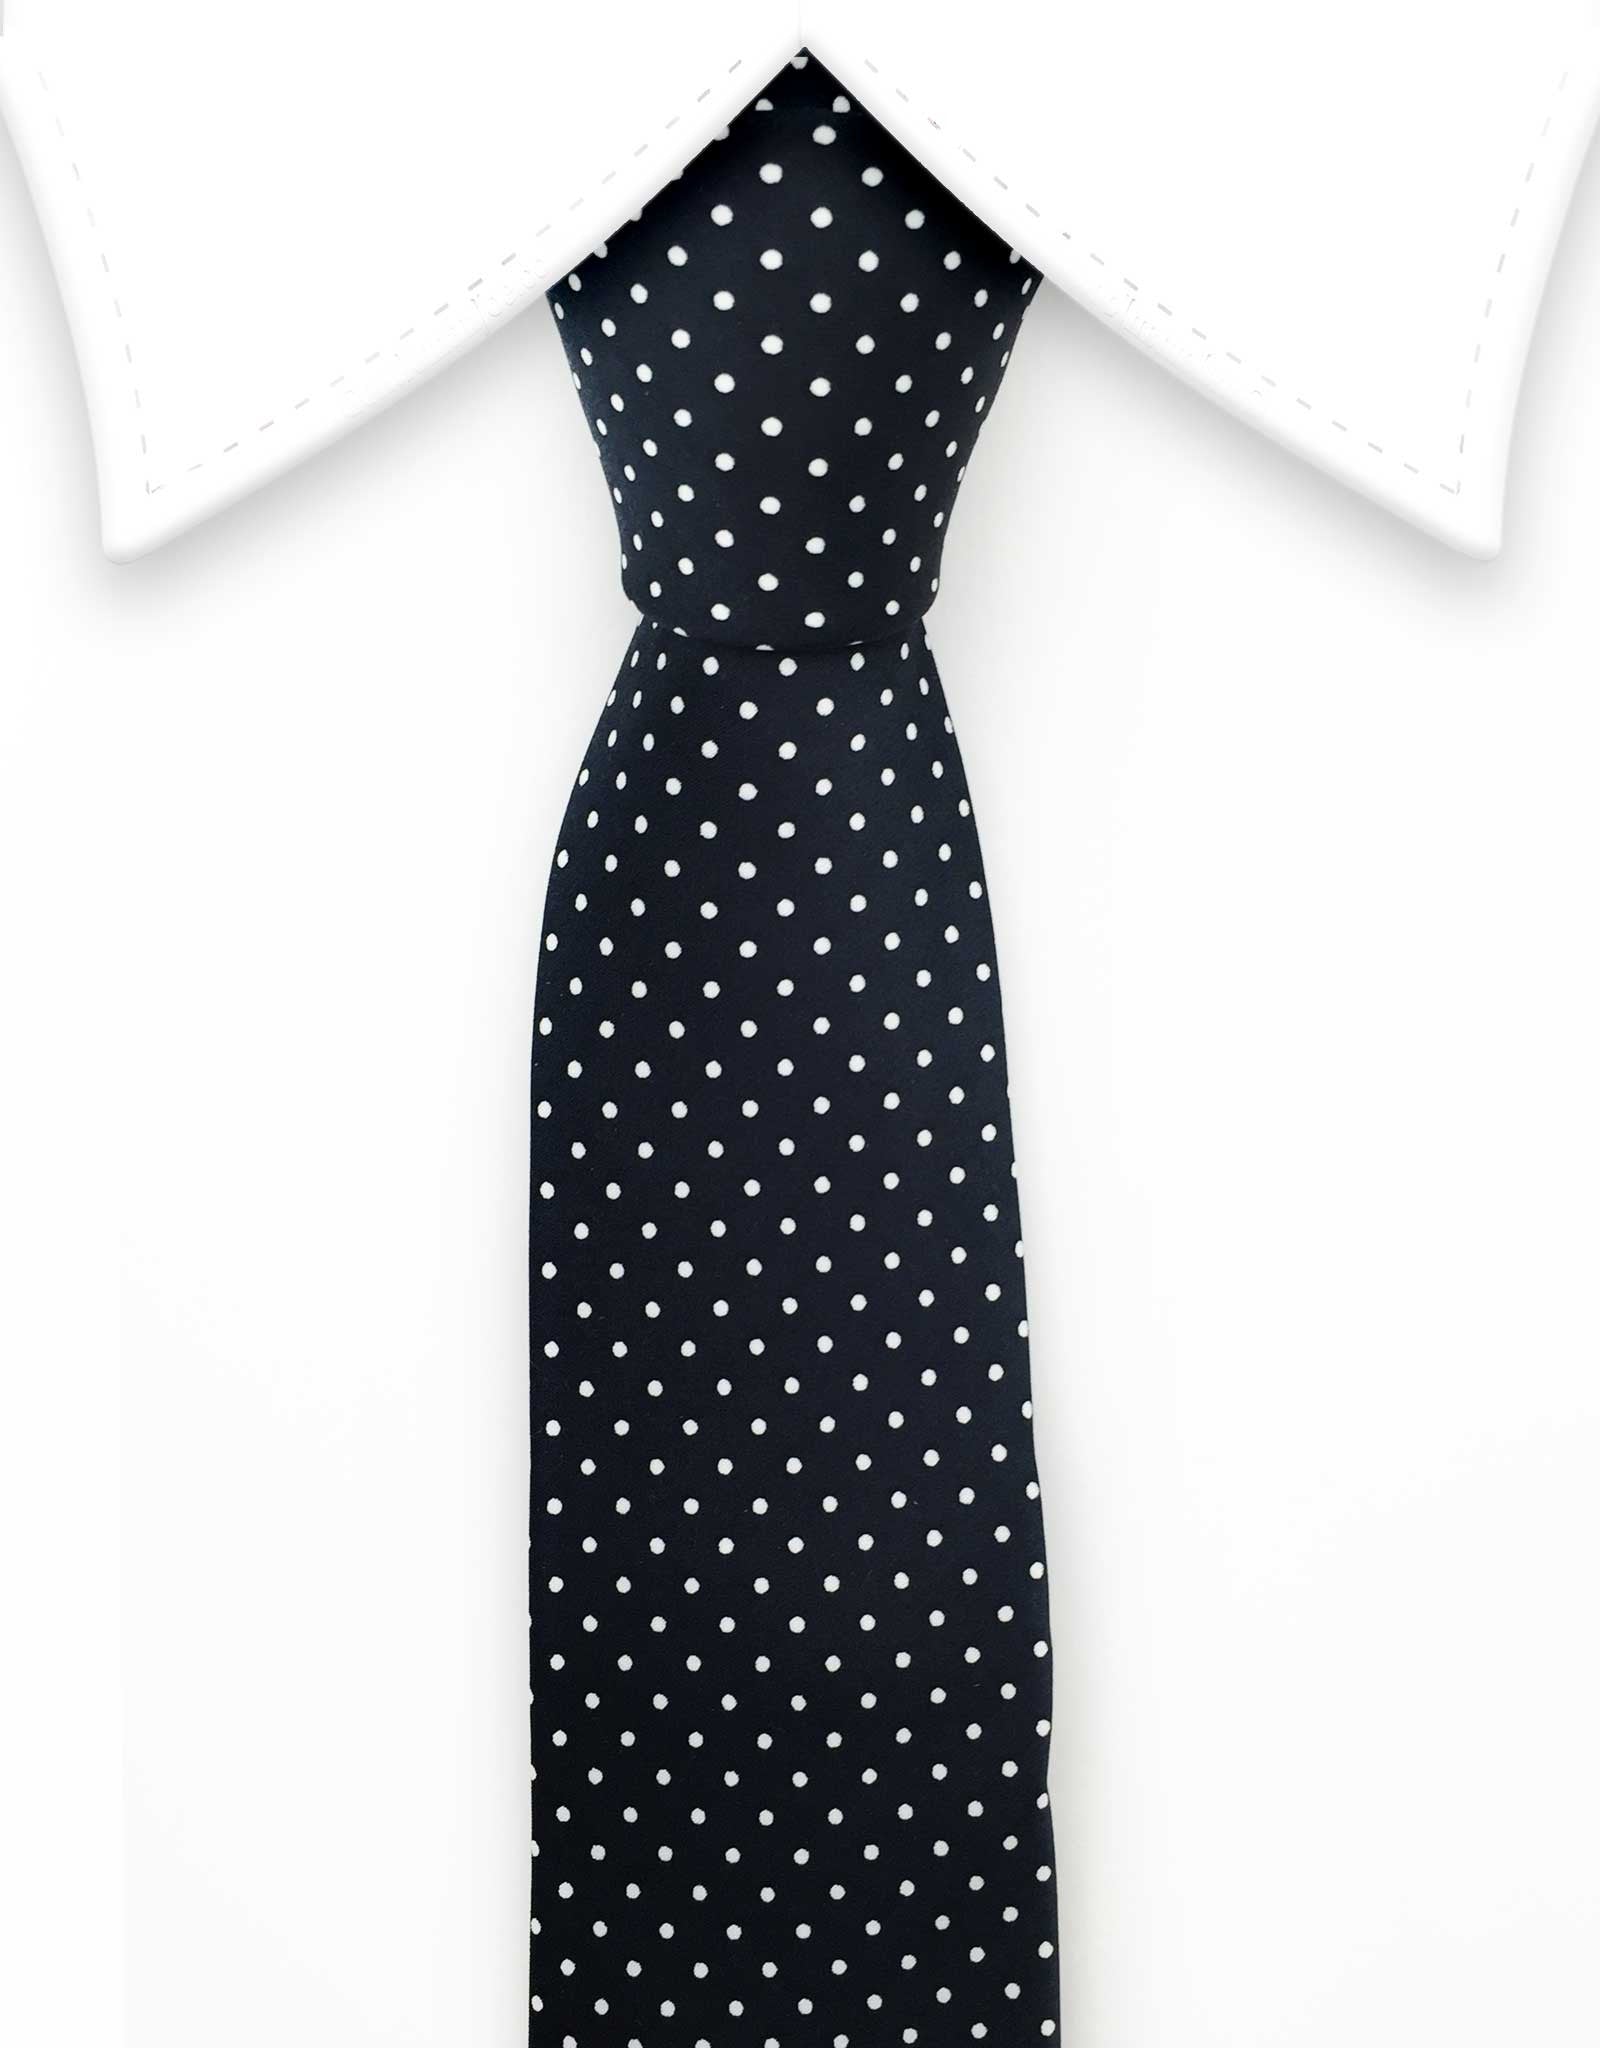 Black tie with white pin dots